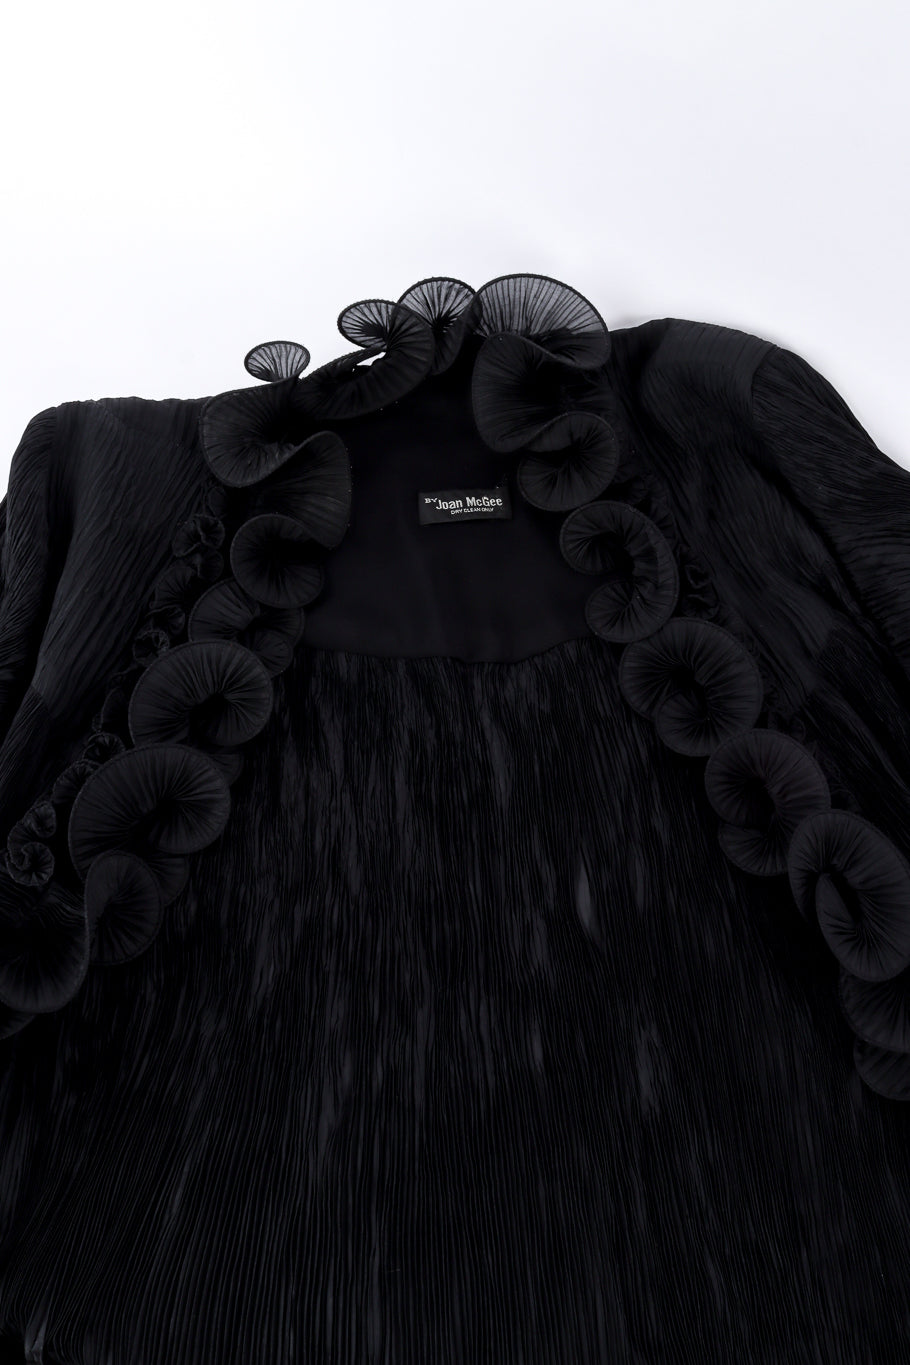 Vintage Joan McGee Pleated Spiral Ruffle Duster front view of interior @recess la